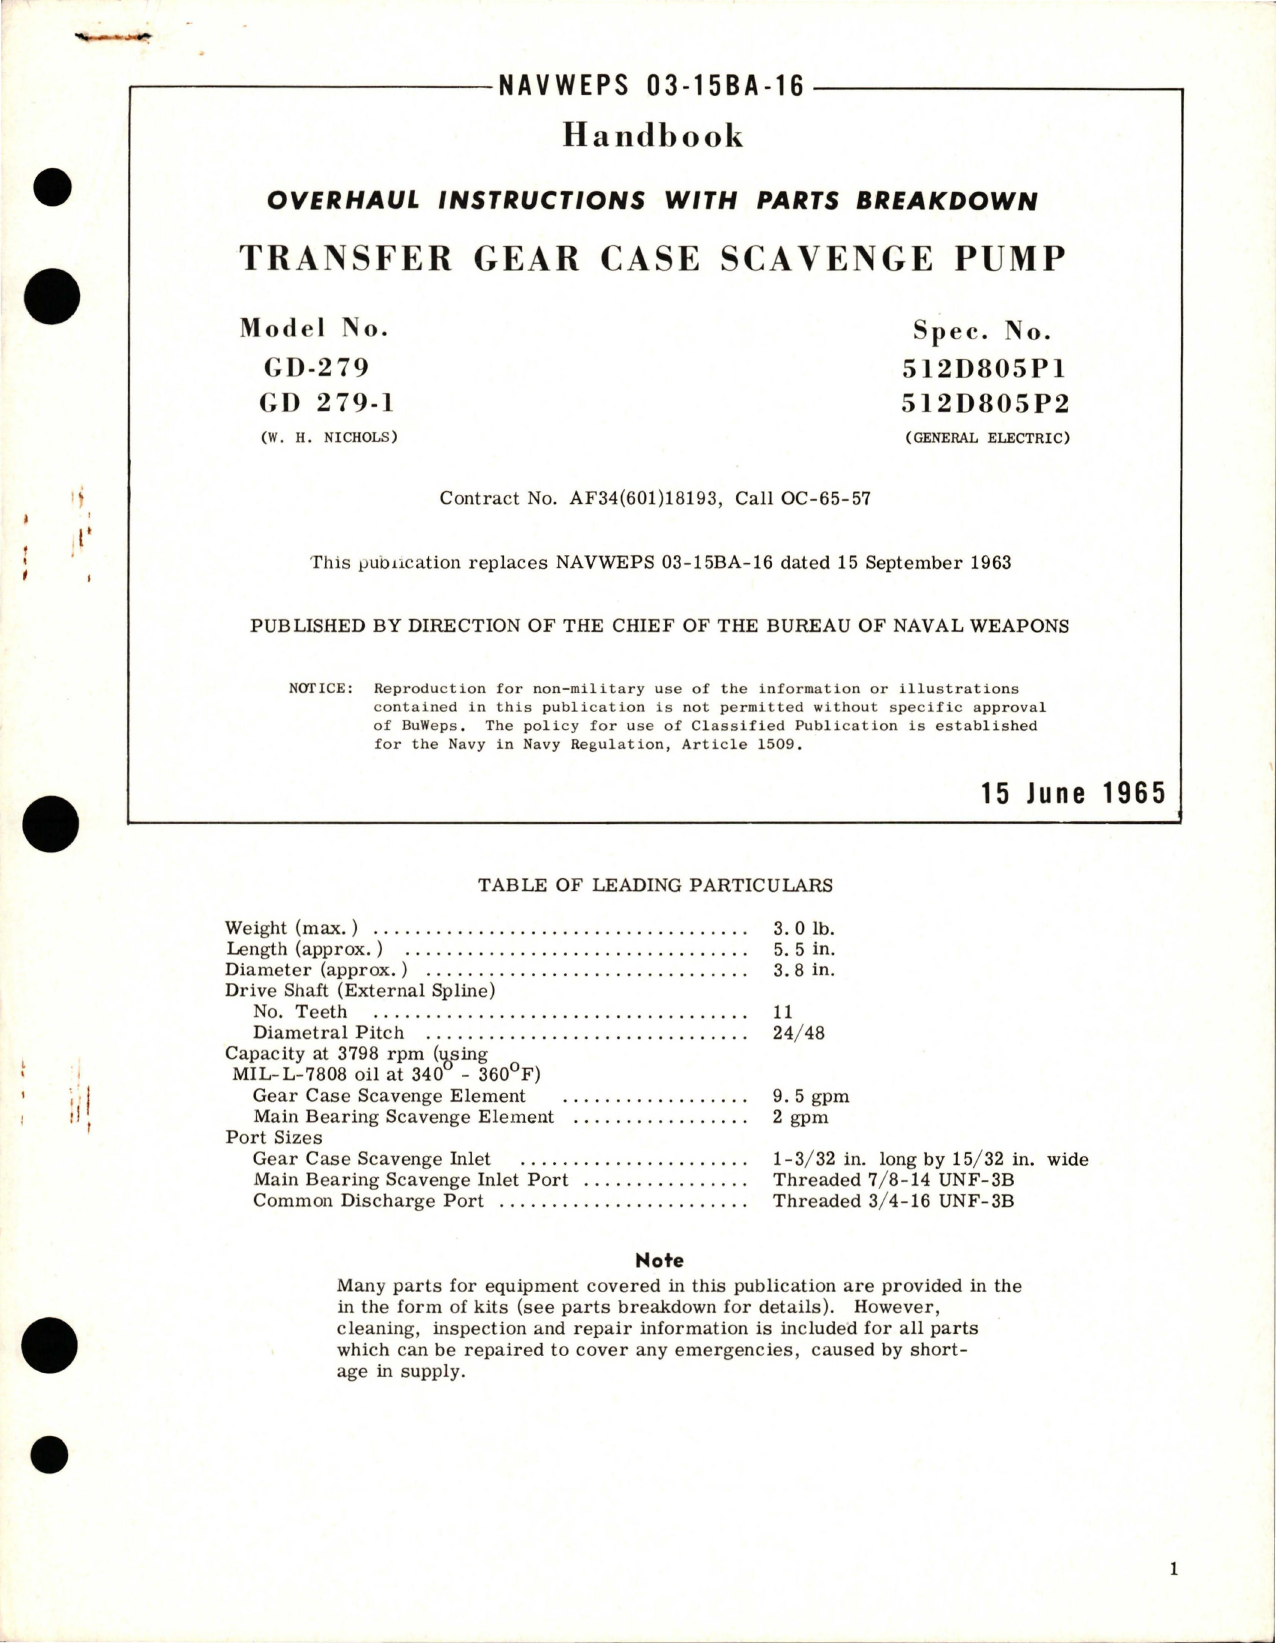 Sample page 1 from AirCorps Library document: Overhaul Instructions with Parts for Transfer Gear Case Scavenge Pump - Model GD 279 and GD 279-1